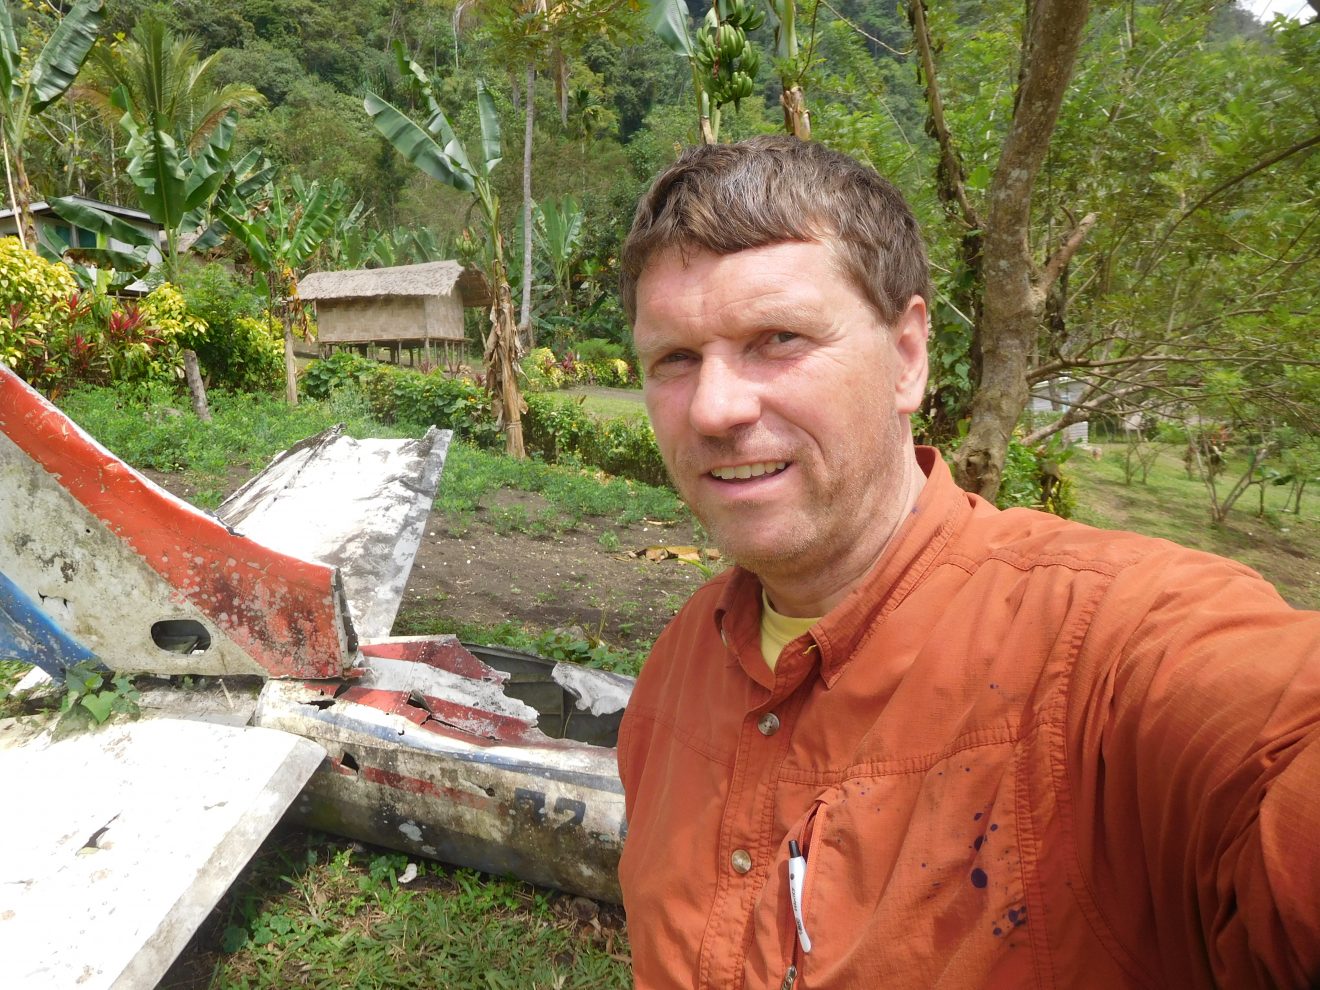 Selfie of man standing in green area (jungle?) with a crashed plane behind him.